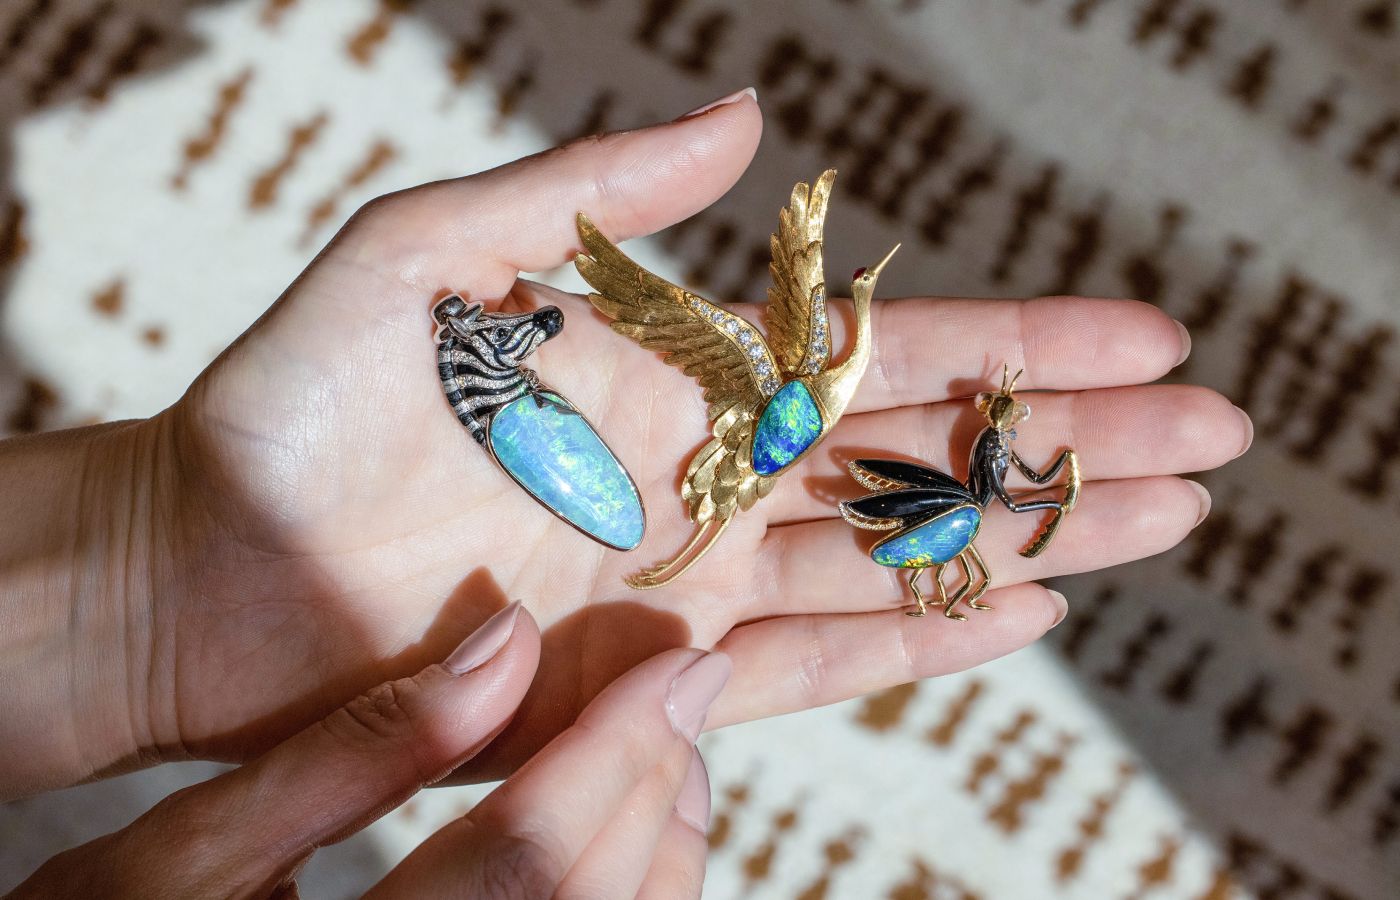 A trio of nature-inspired brooches by Cindy Xu, including a crane in 18k gold with a 3.48 carat black opal and diamonds, and a praying mantis with a 4.4 carat boulder opal, black agate and black diamonds, also in 18k gold 